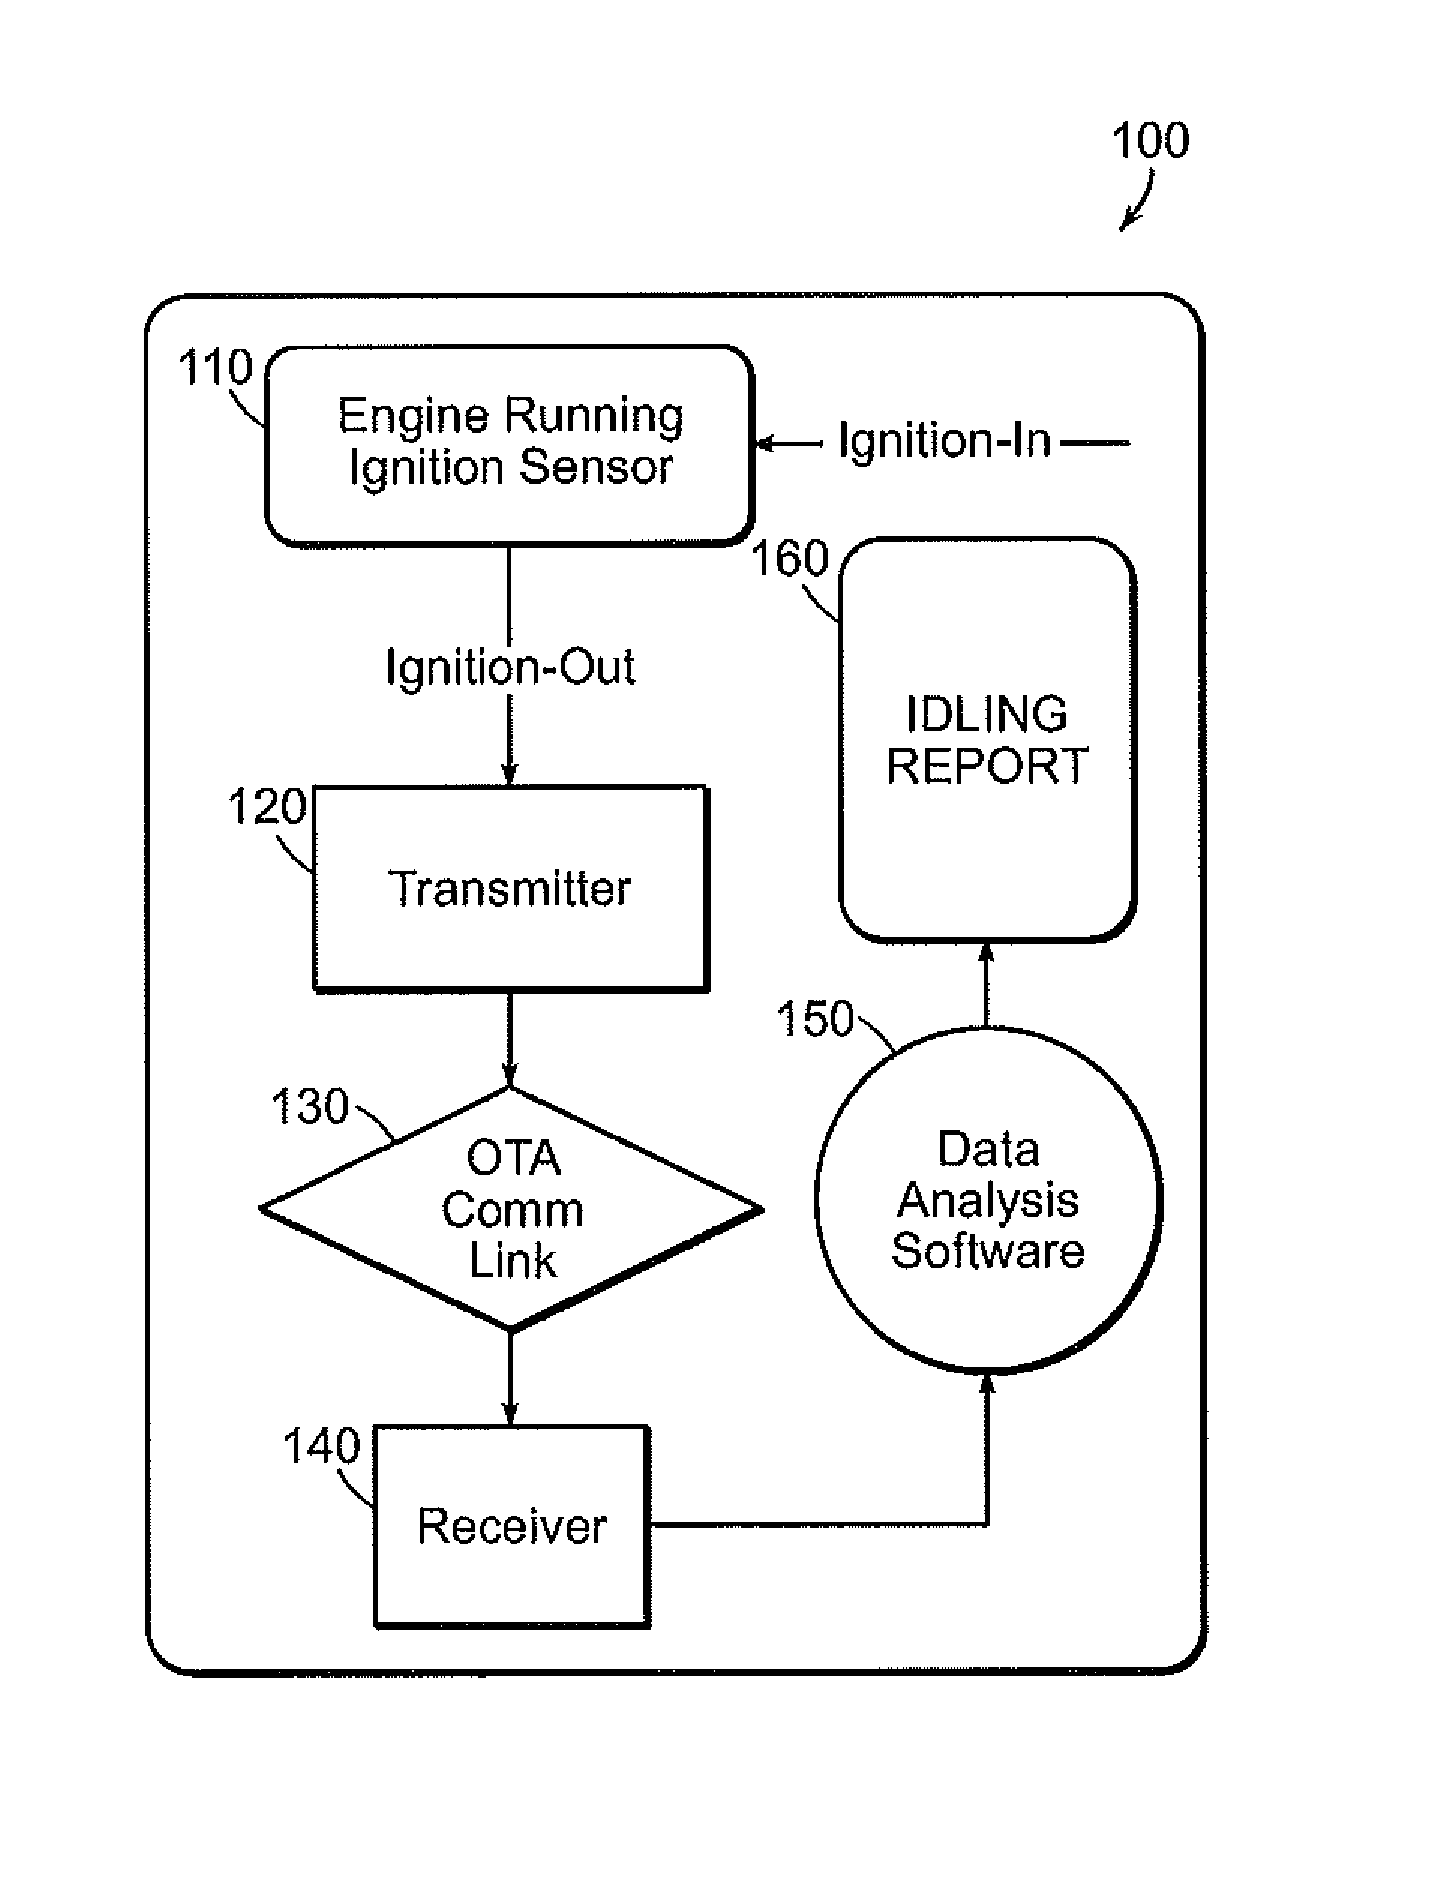 Systems, devices and methods for detecting engine idling and reporting same